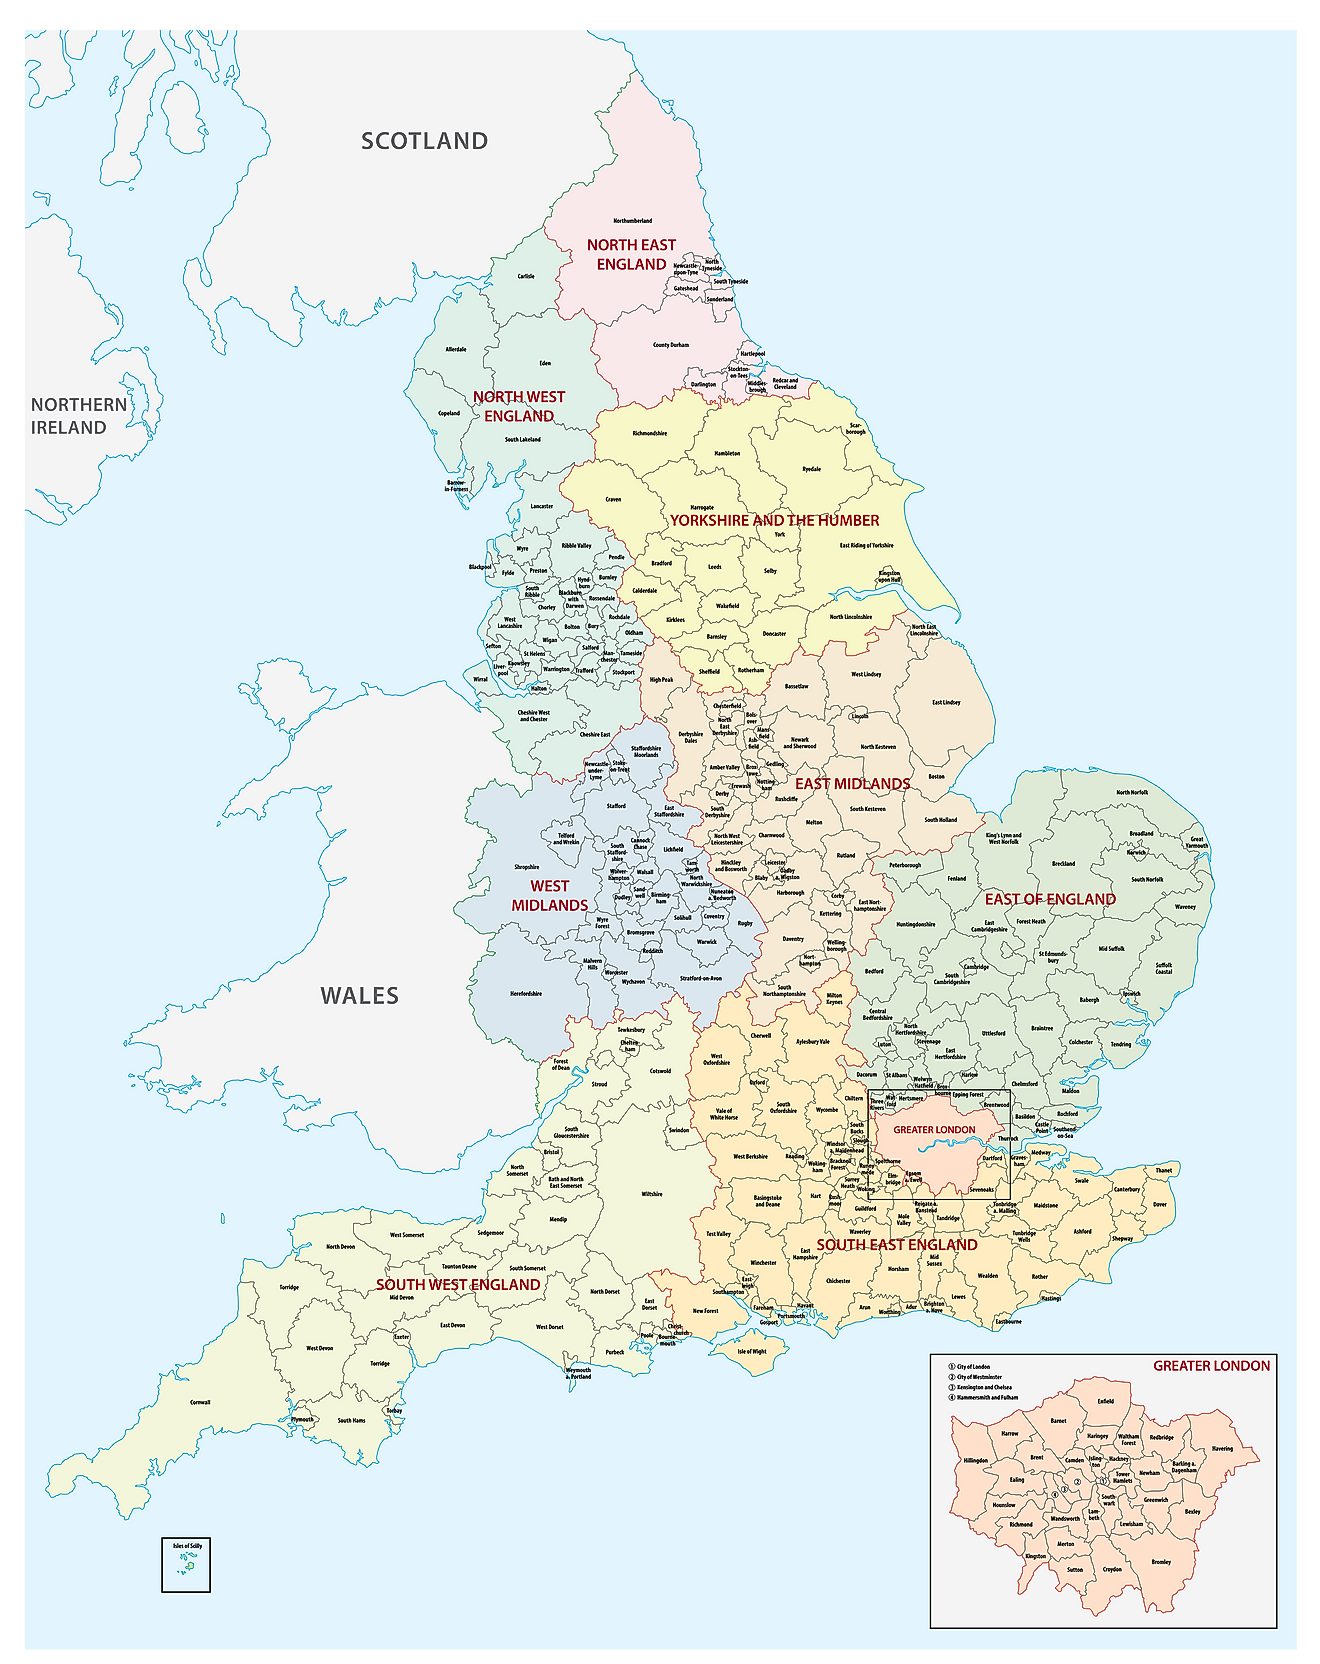 Administrative Map of England showing its 9 regions and its capital city - London